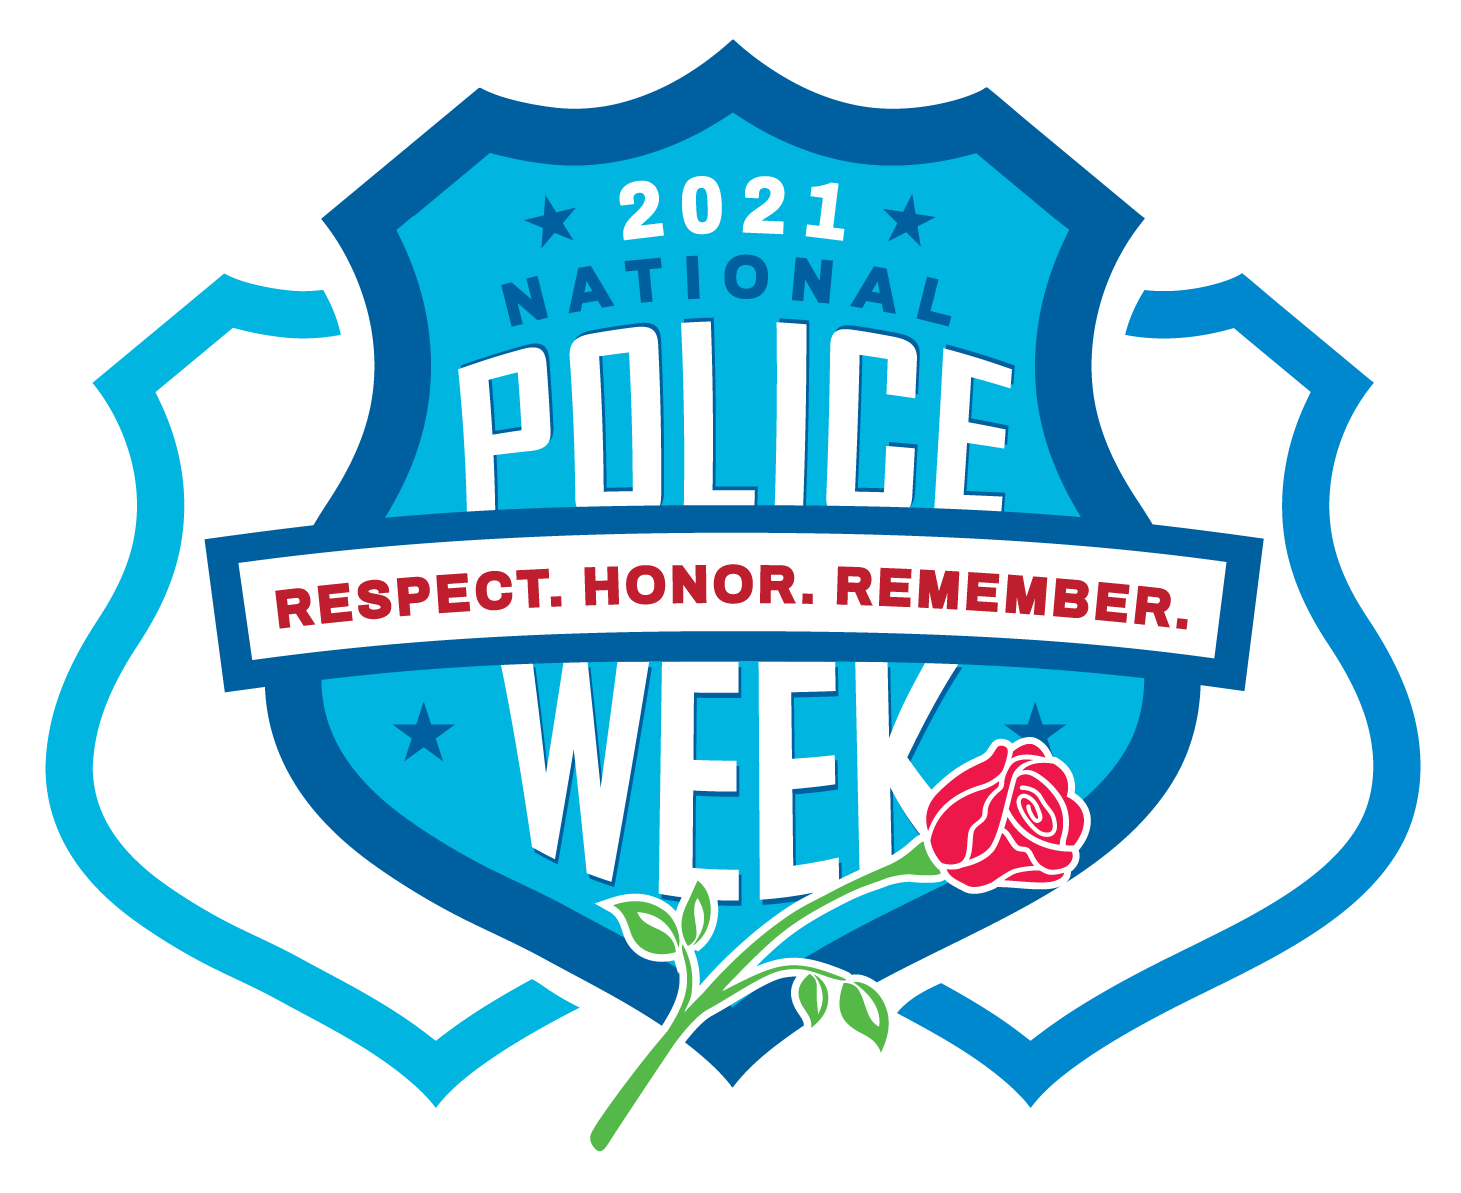 May 9th-15th is National Police Week